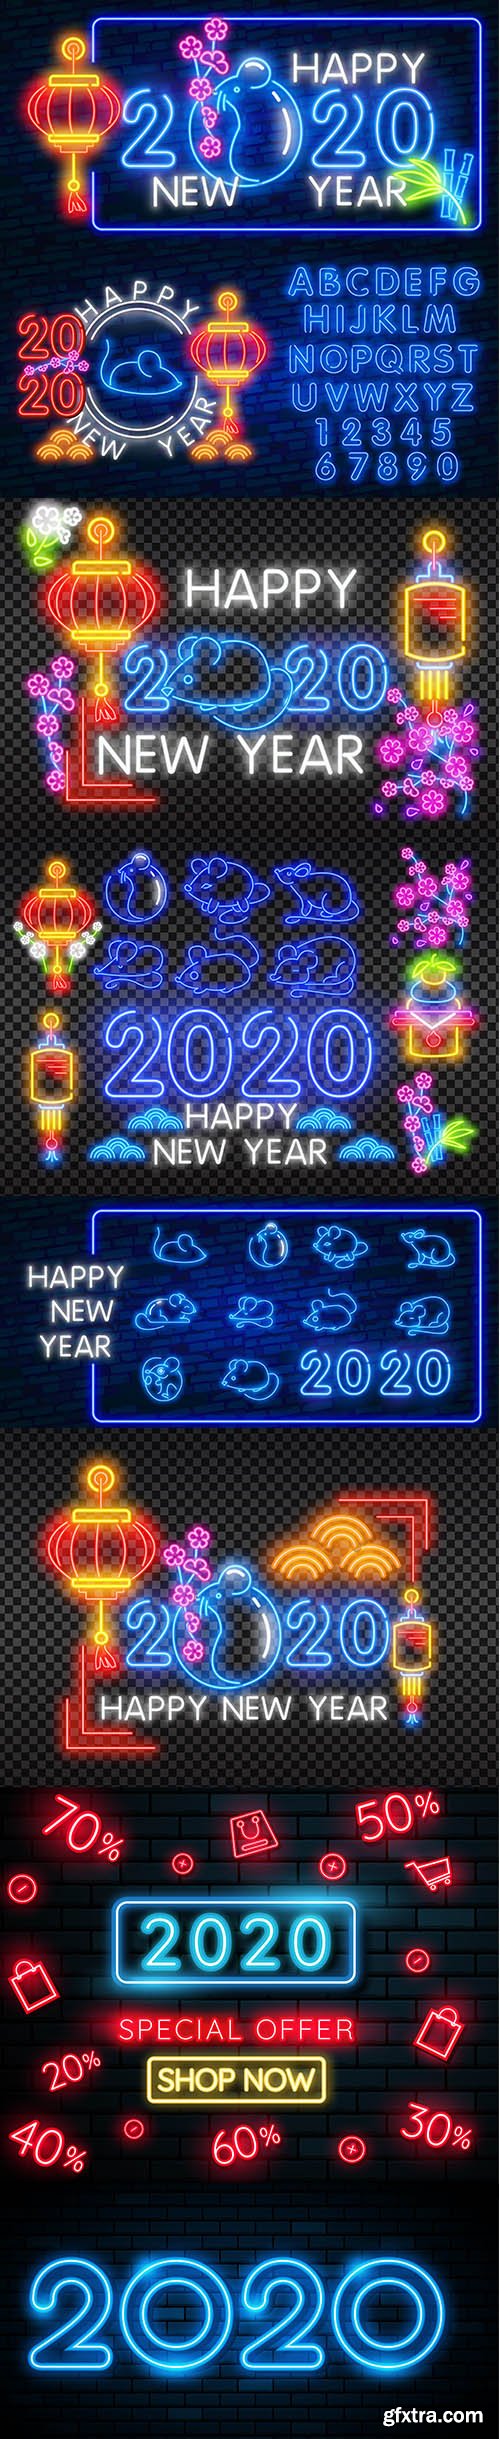 Abstract Chinese New Year 2020 Neon Greeting Card Backgrounds